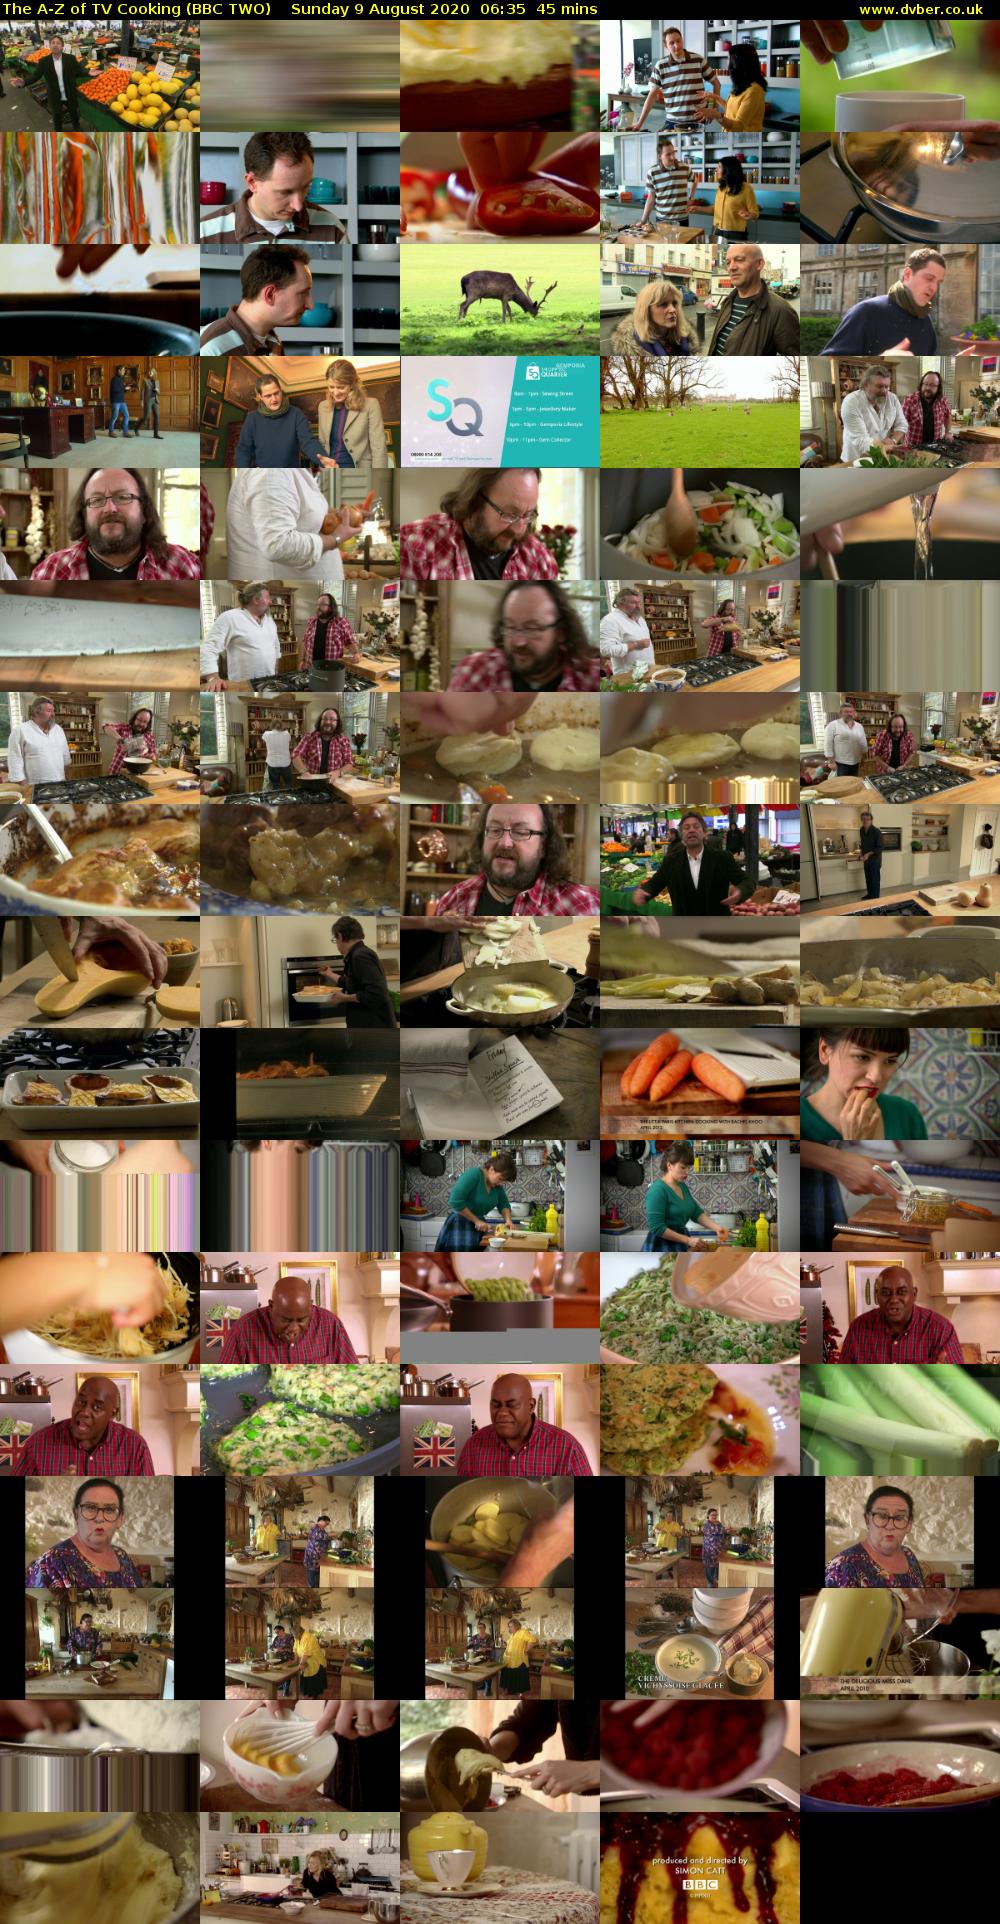 The A-Z of TV Cooking (BBC TWO) Sunday 9 August 2020 06:35 - 07:20